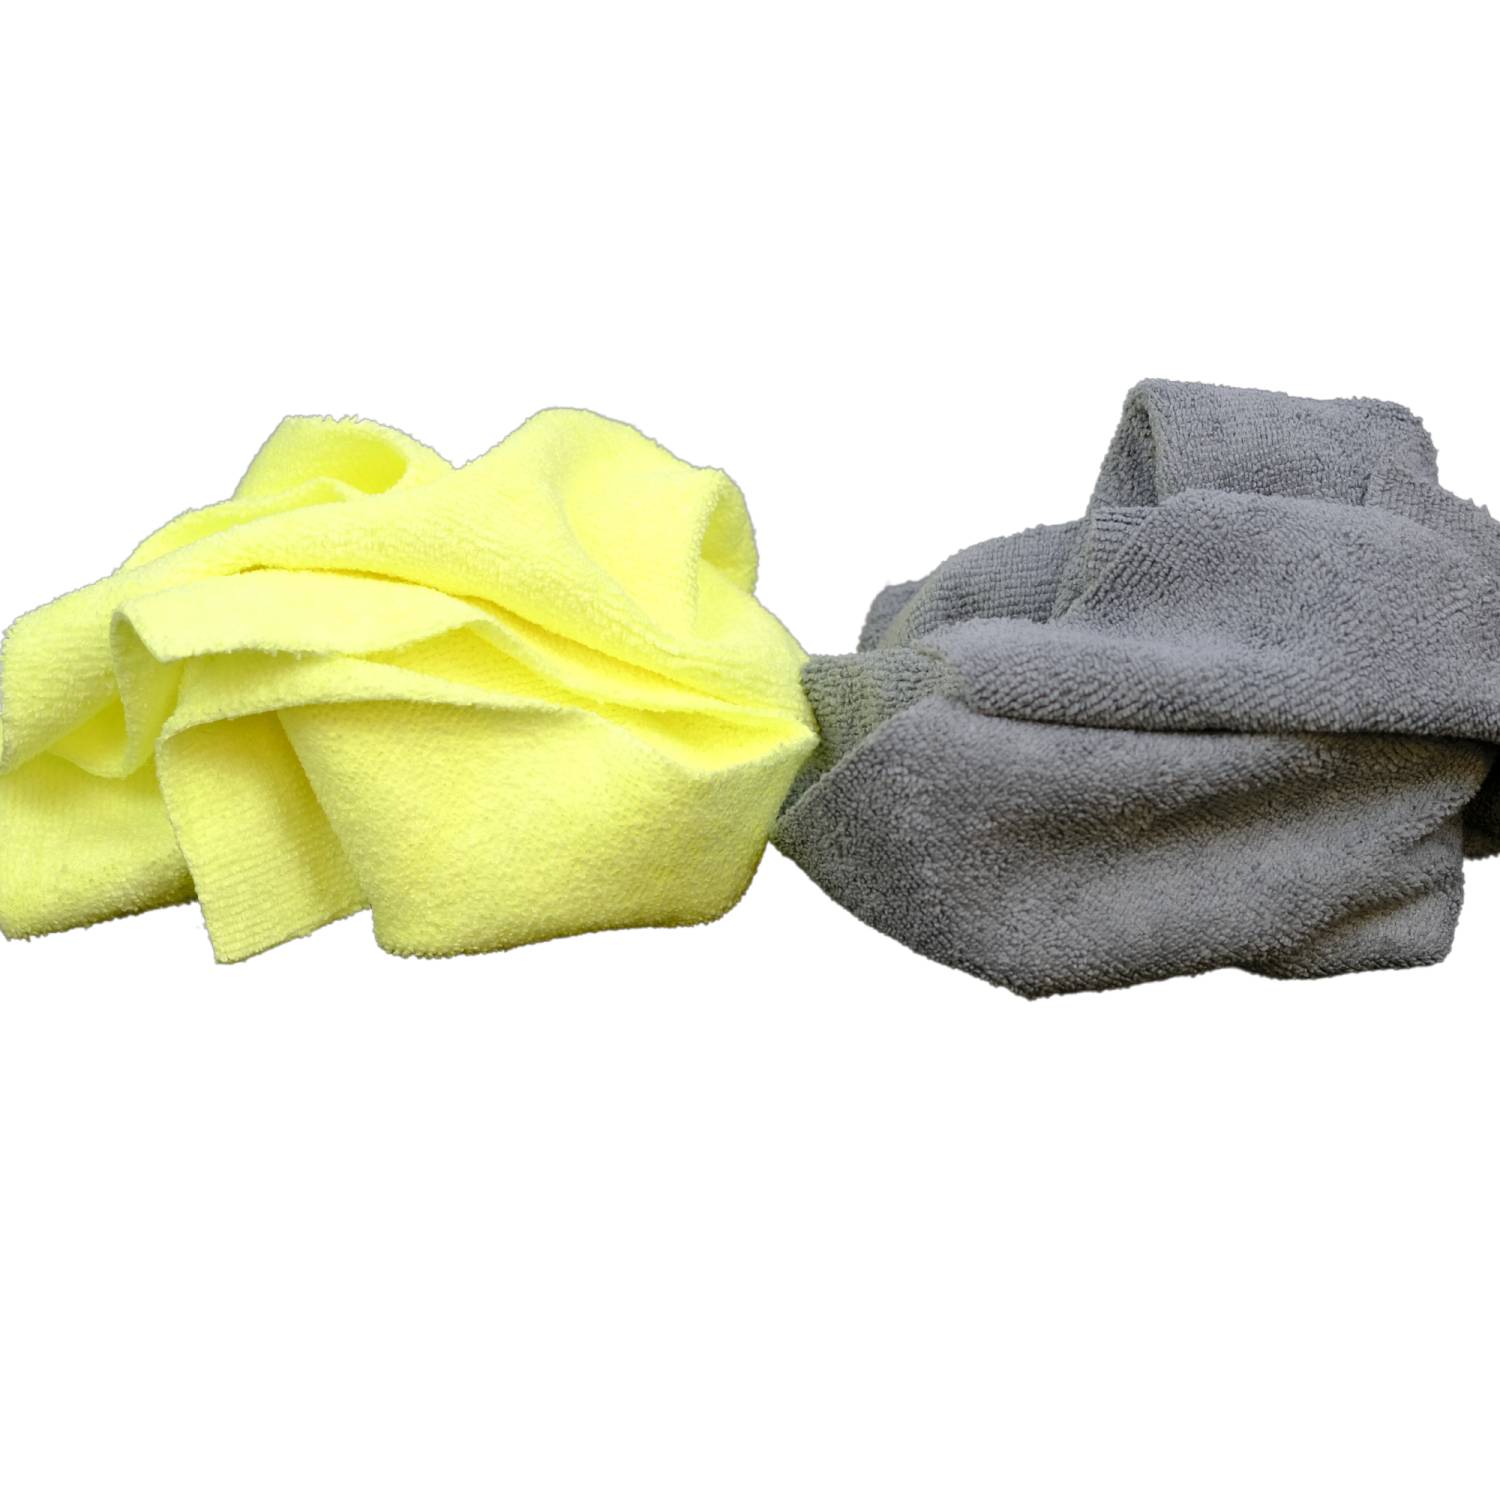 Microfibre Seamless Terry Cloth in Grey & Yellow 